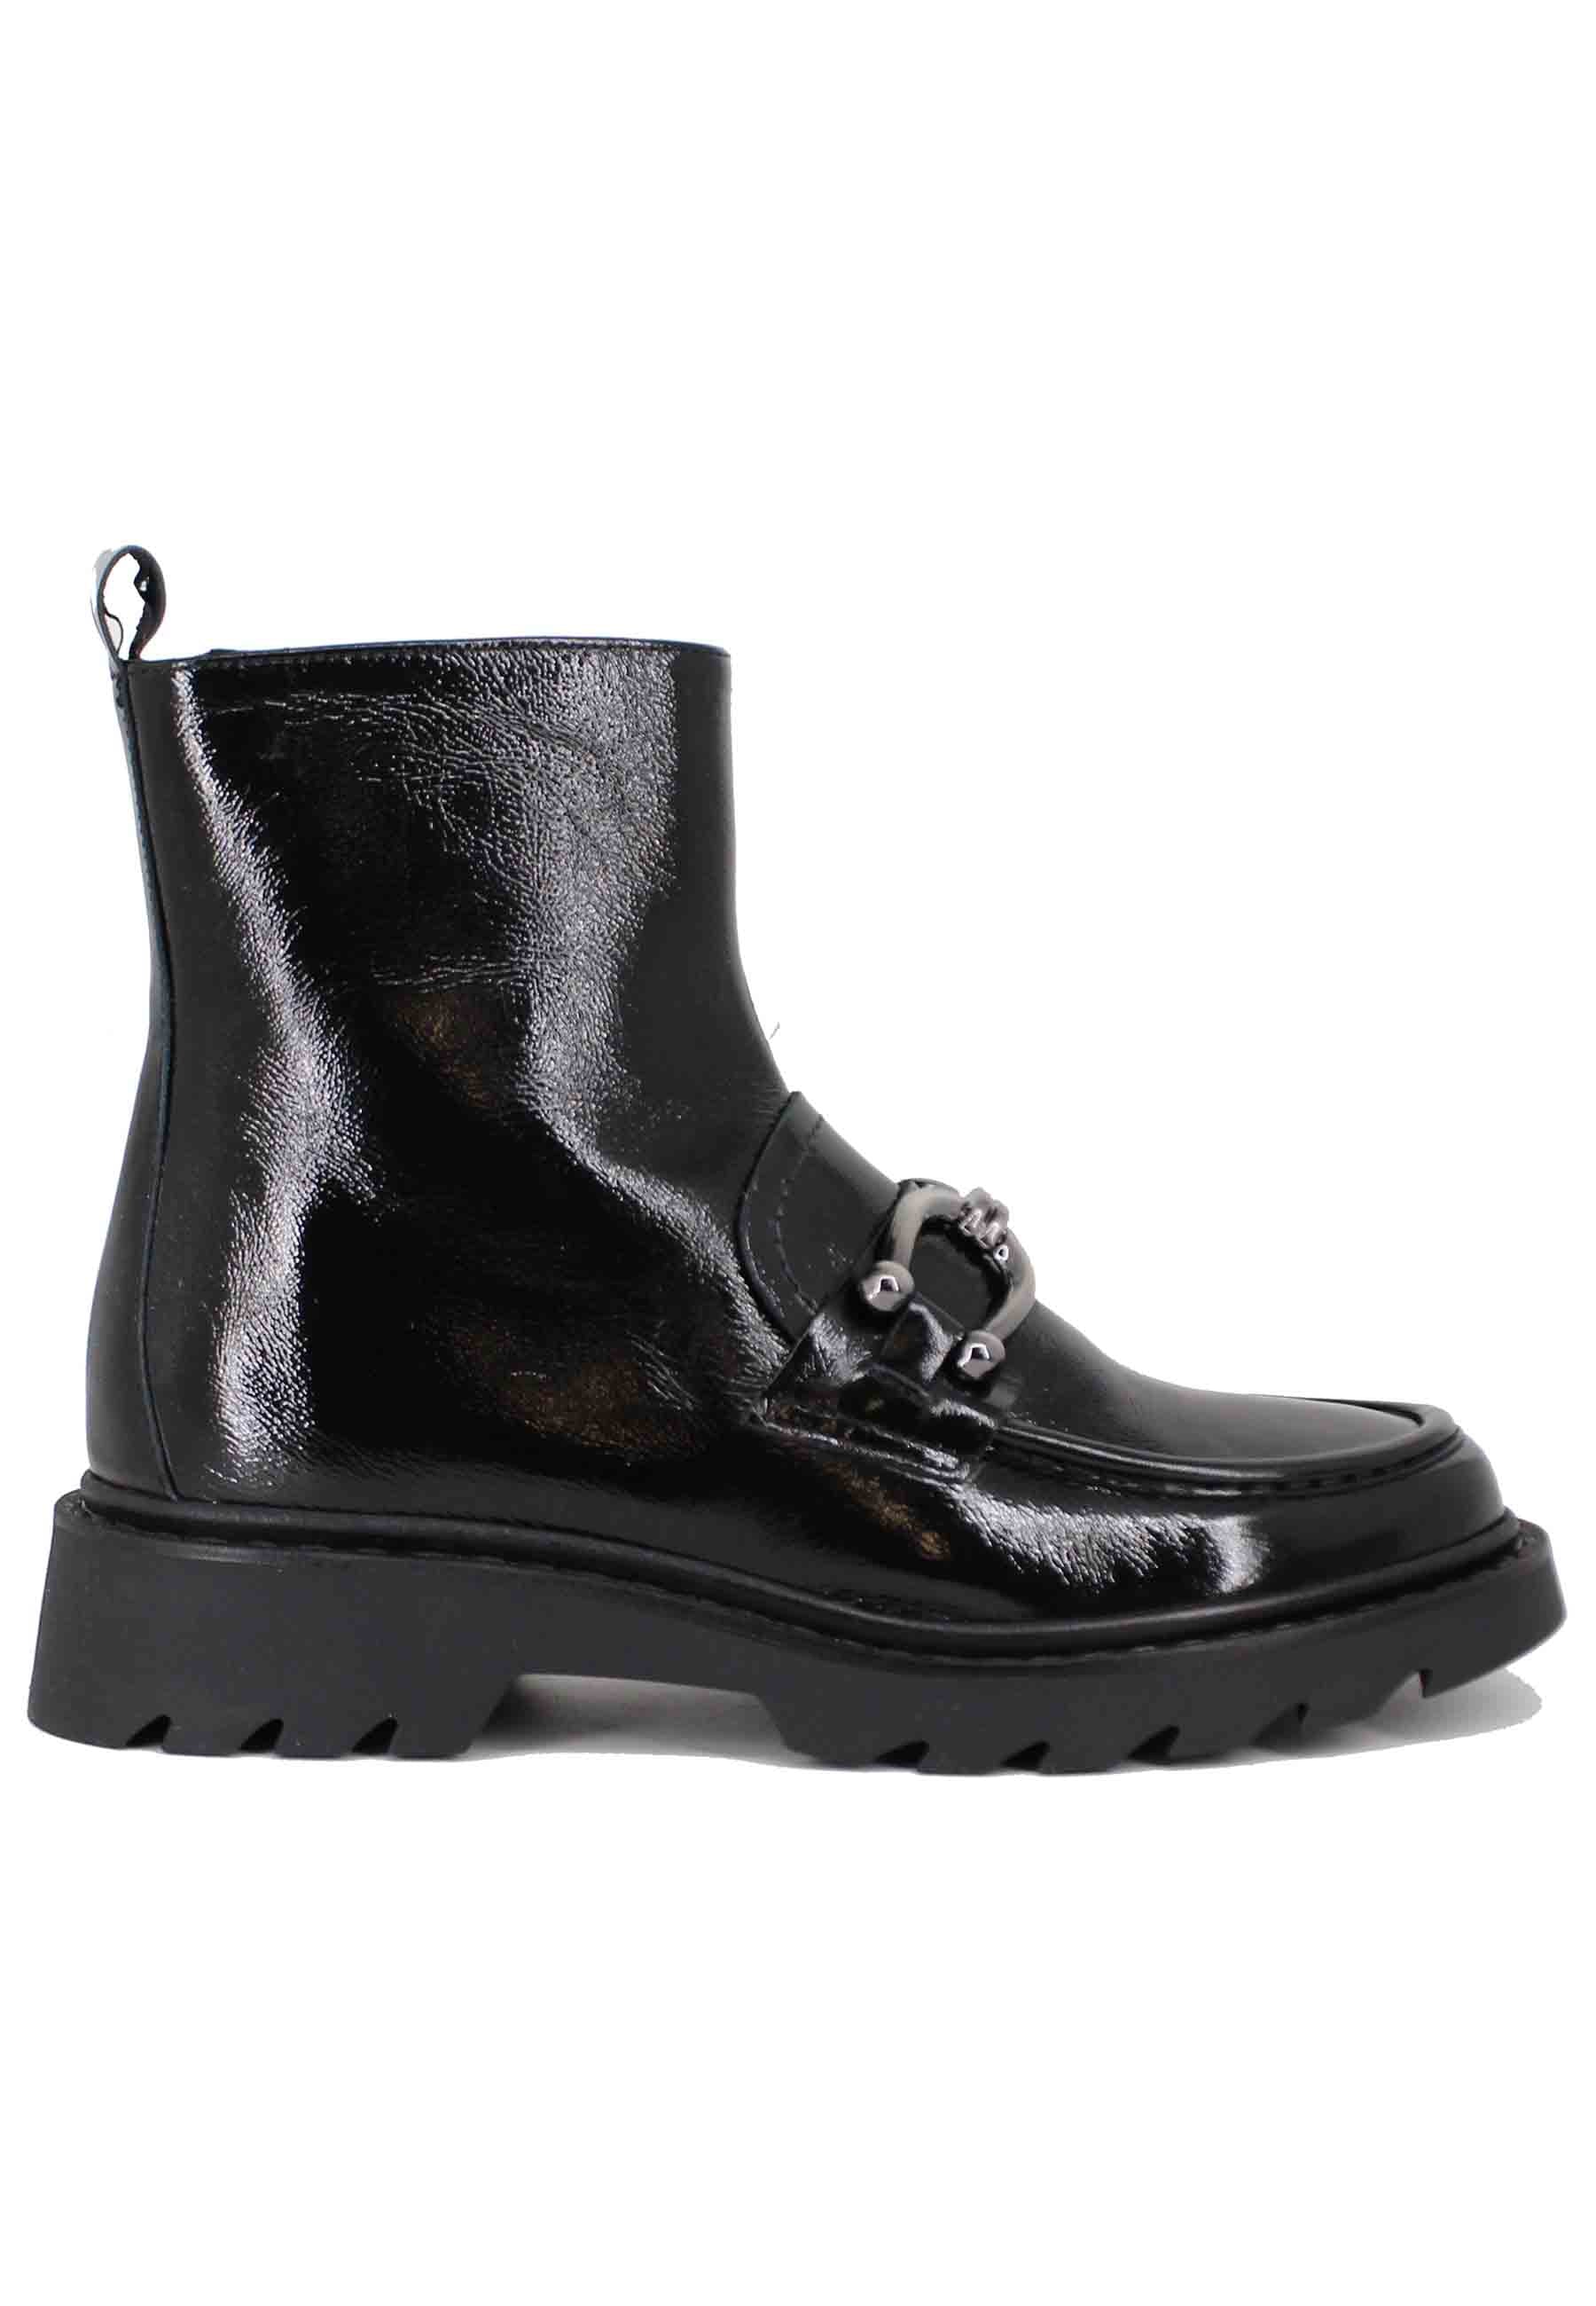 Women's black patent leather ankle boots with lug sole